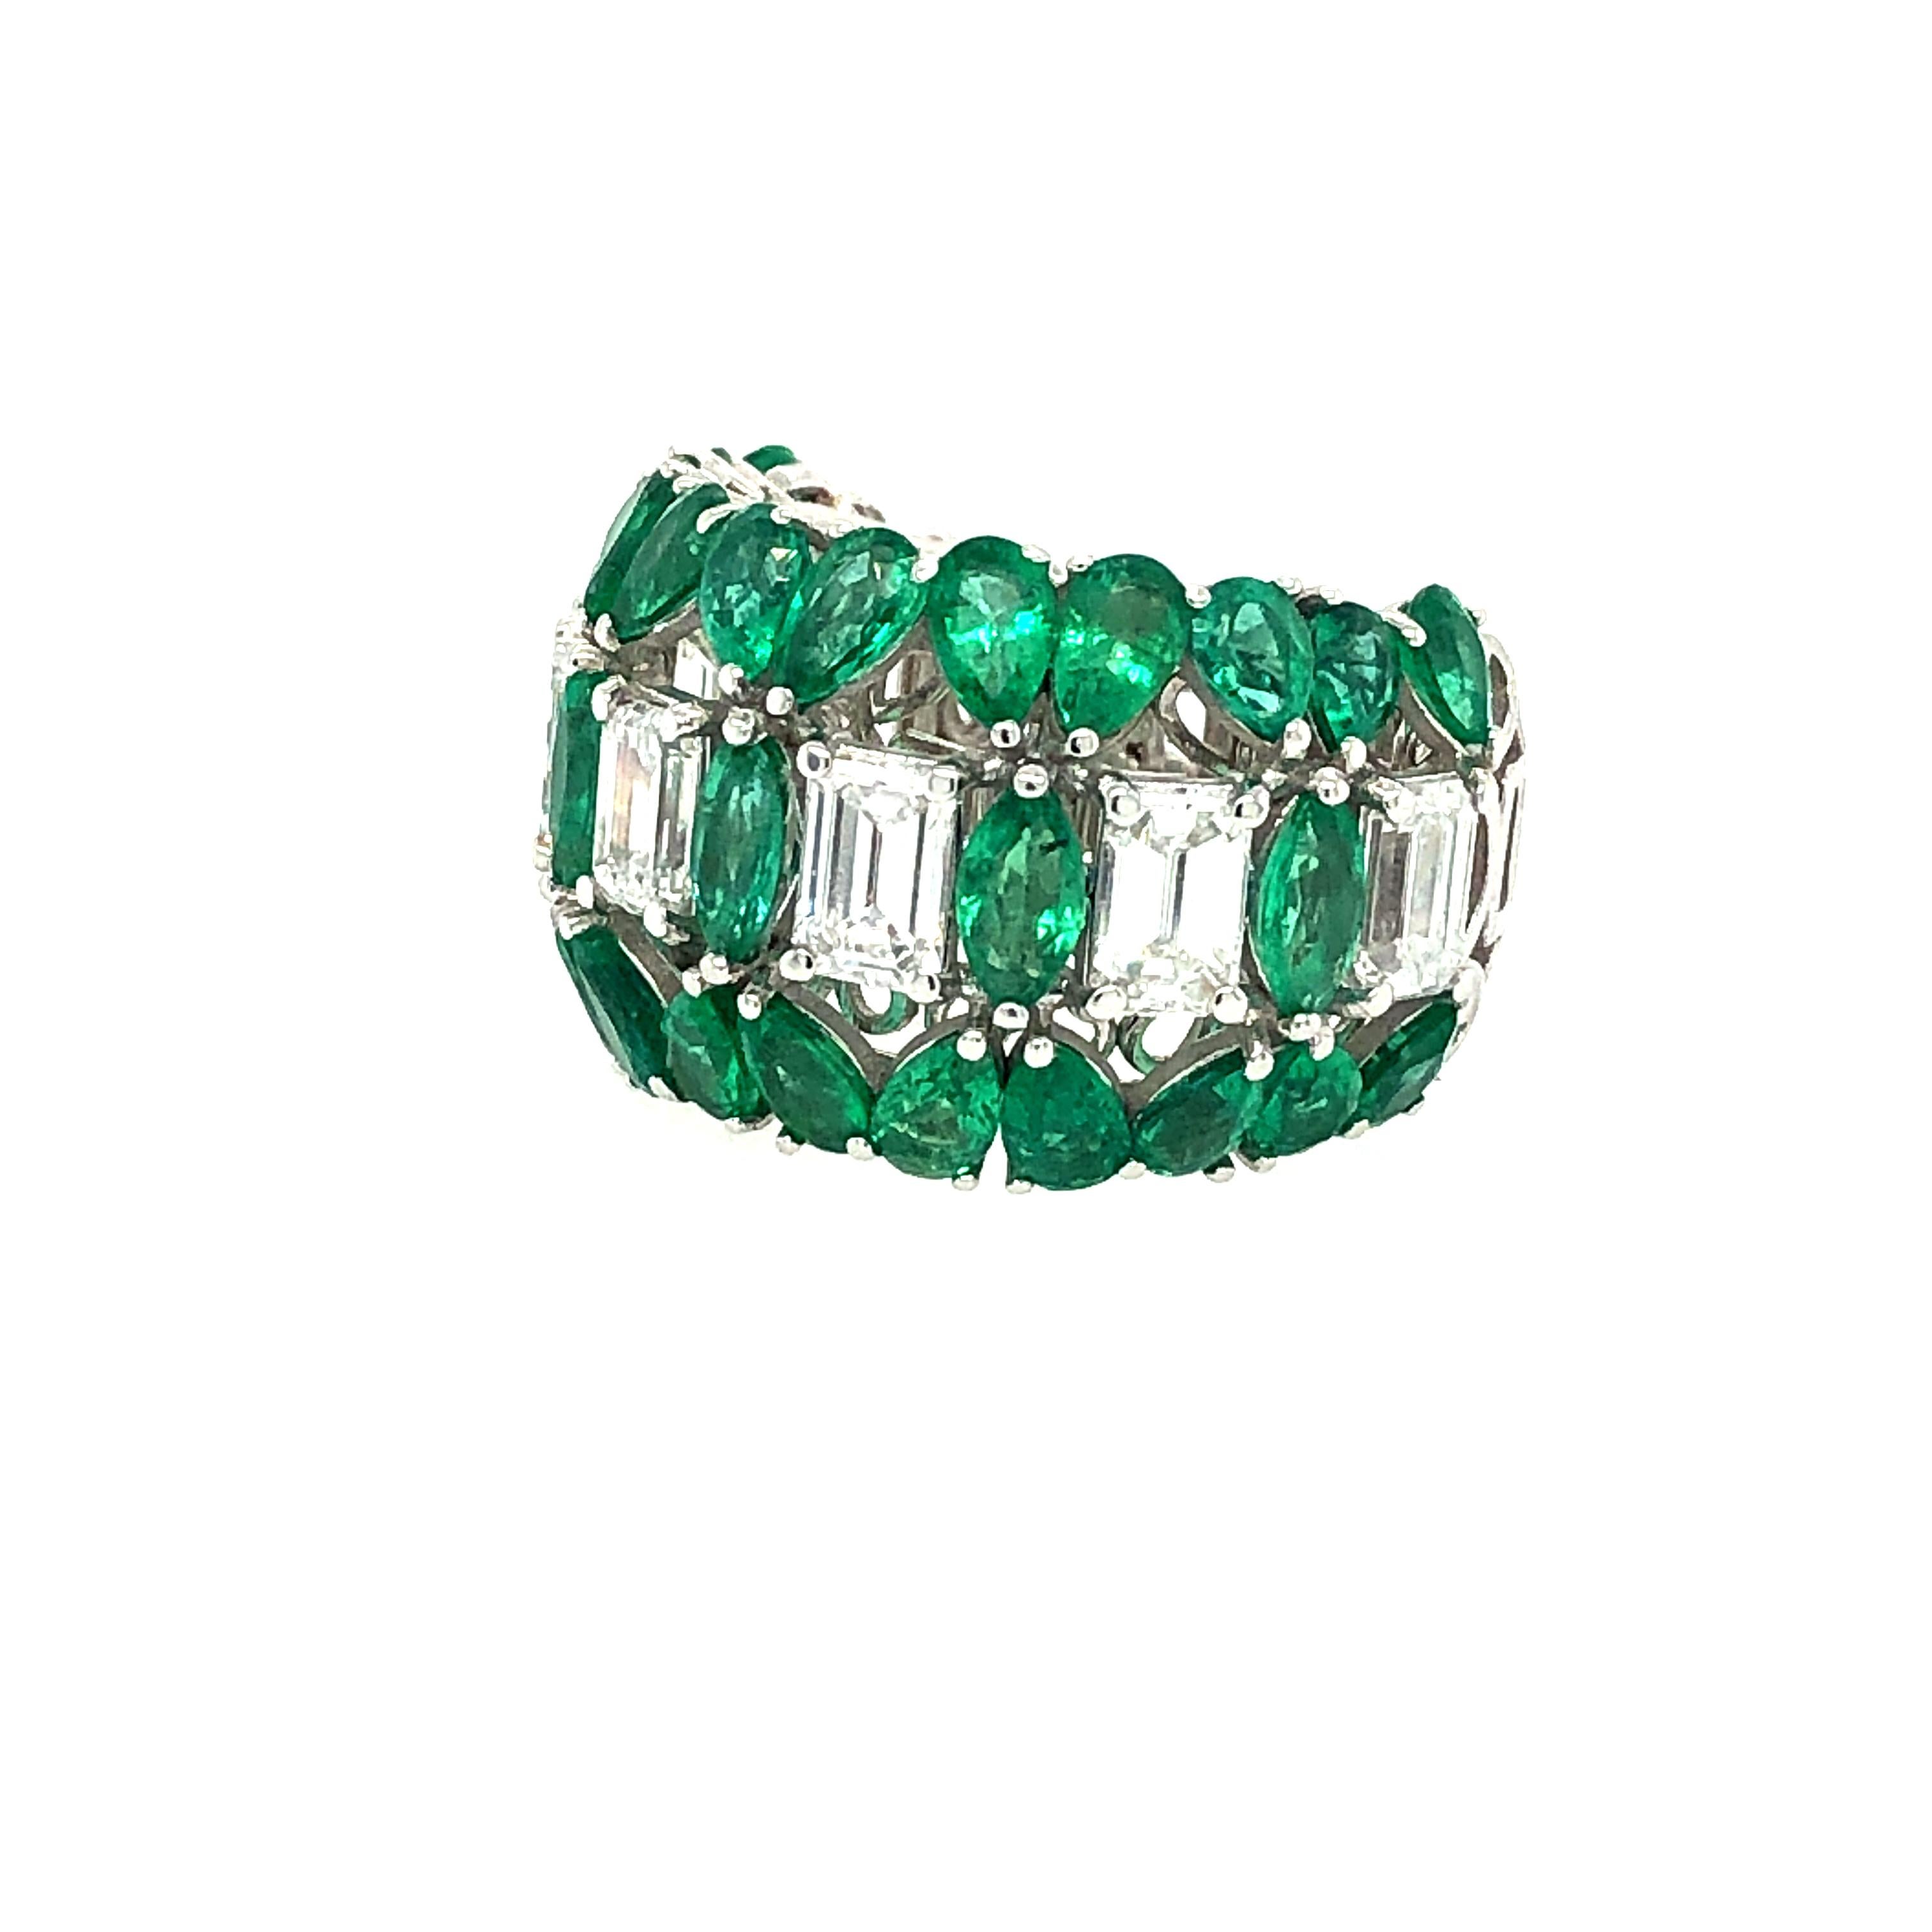 Offered here is a stunning emerald and diamond ring set in 18kt white gold. The craftsmanship of the ring is superb. The ring has five ( 5 ) natural emerald cut diamonds G color Vs1 in clarity with an estimated total weight of 2.25 carats, plus you